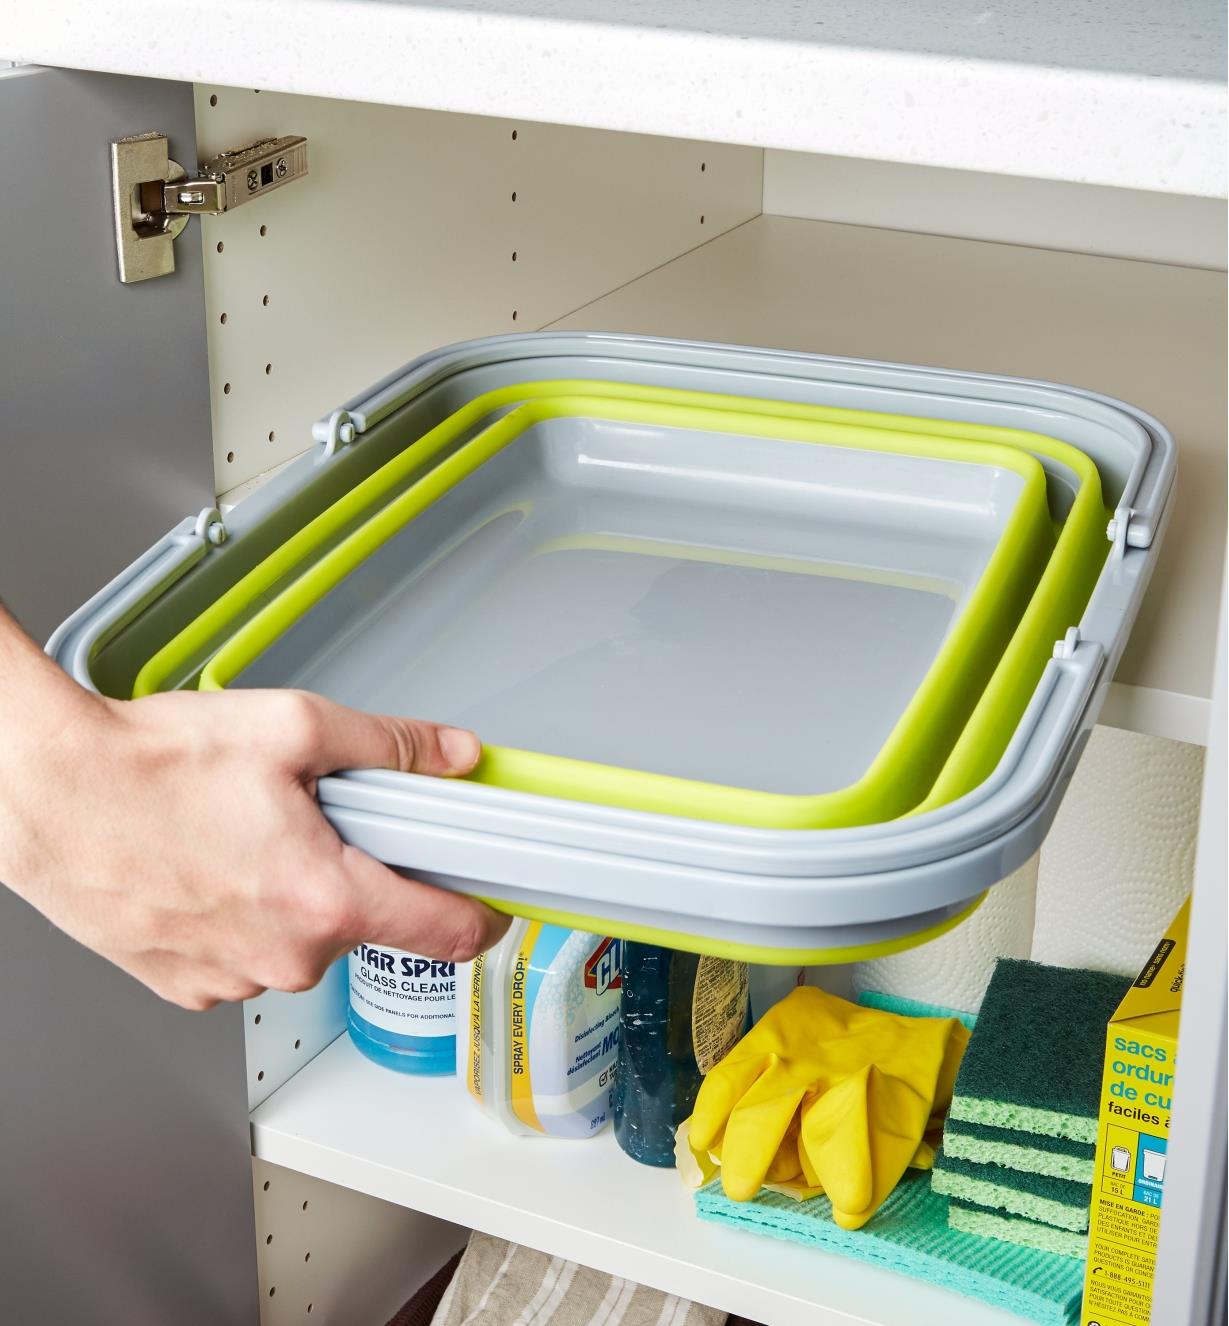 Collapsible tote collapses to fit into a cupboard